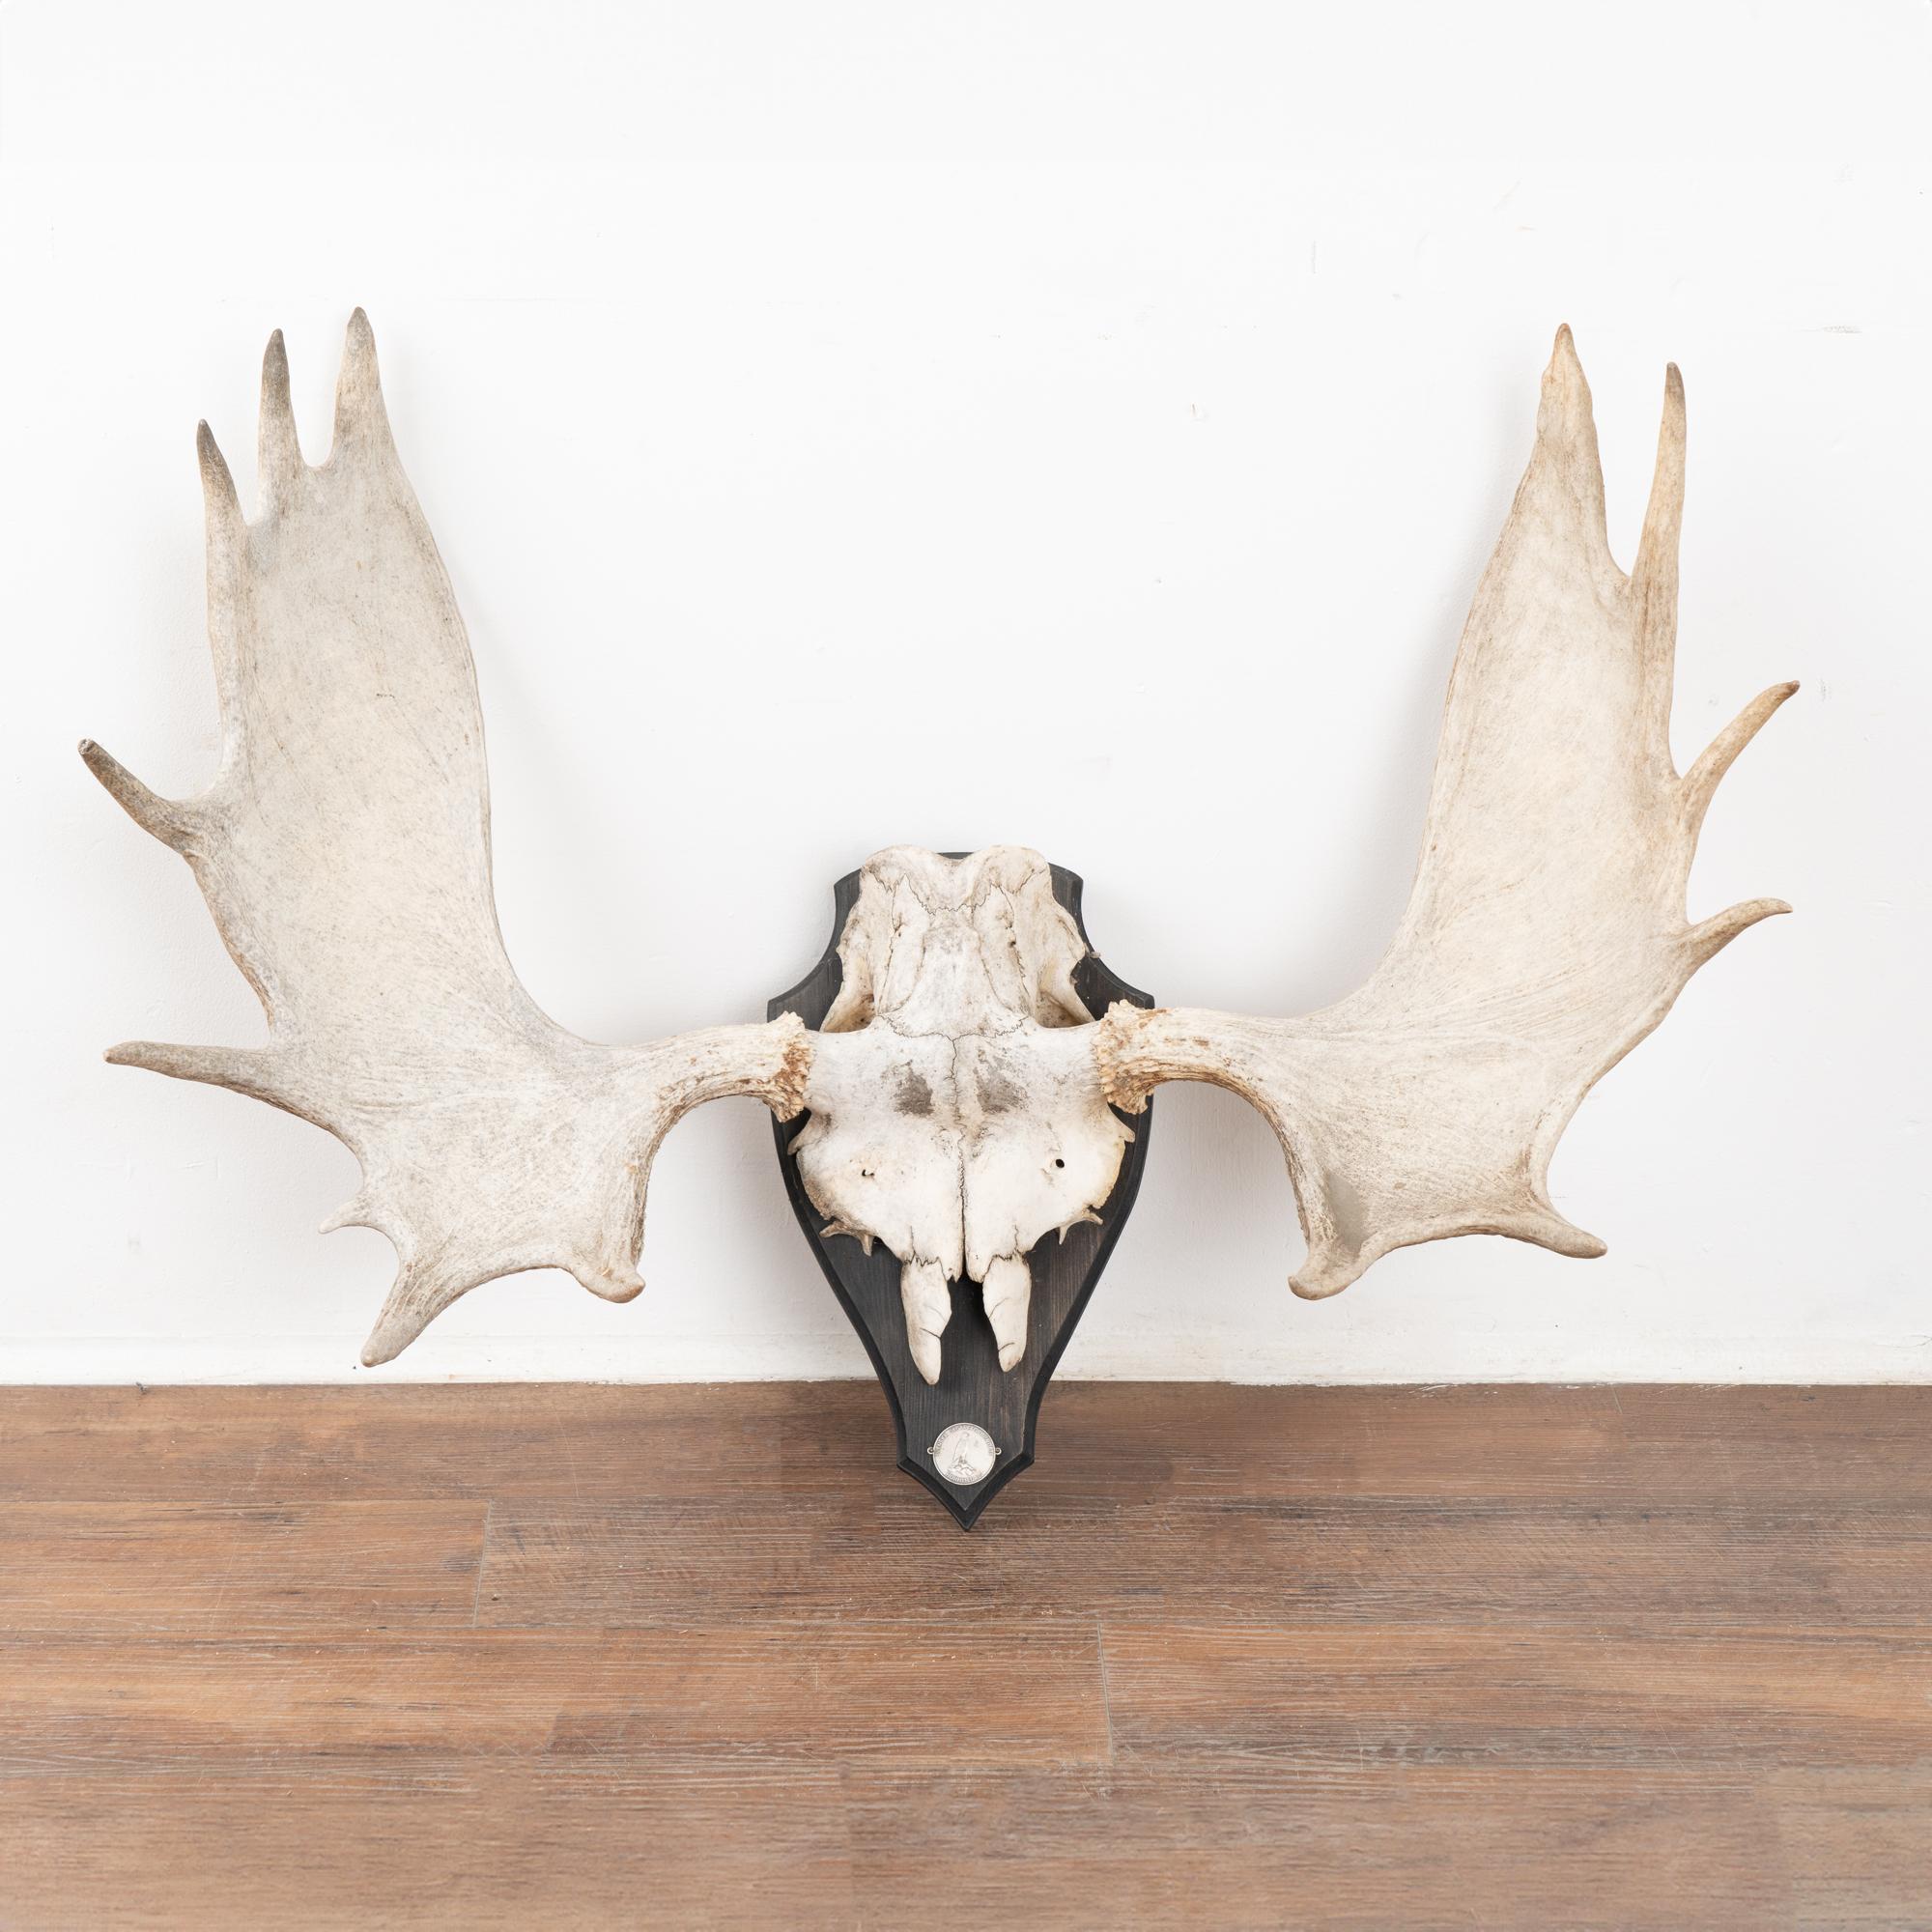 Large trophy size moose antlers mounted on wood plaque. Winner of Swedish hunting association medal (see photos).
Sold in original vintage condition, ready to hang. 

With over 37 years of experience selling European antiques, our brick-and-mortar